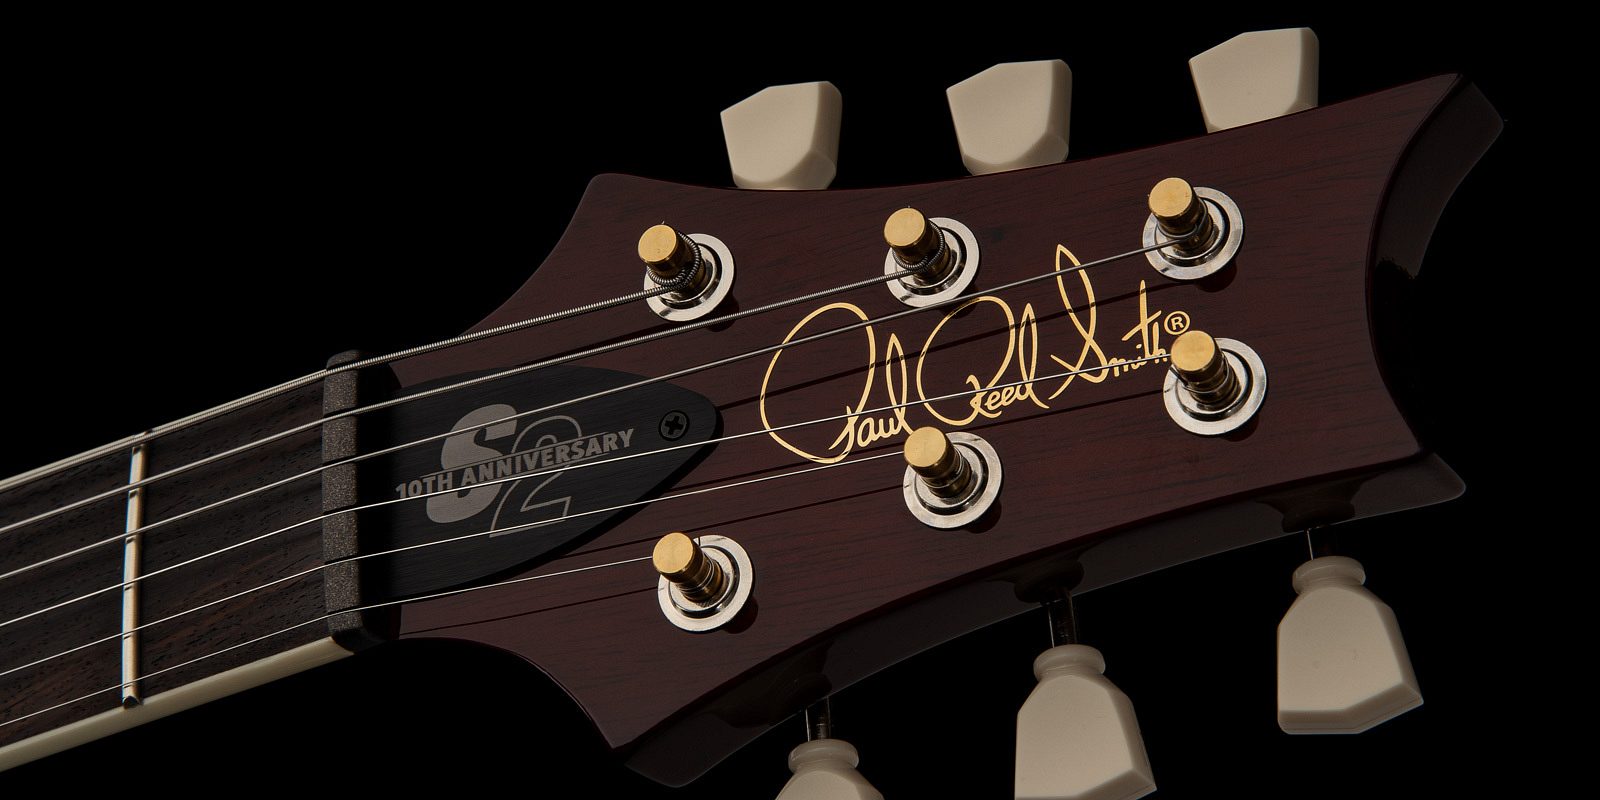 10th anniversary s2 mccarty 594 limited gallery 6 2023